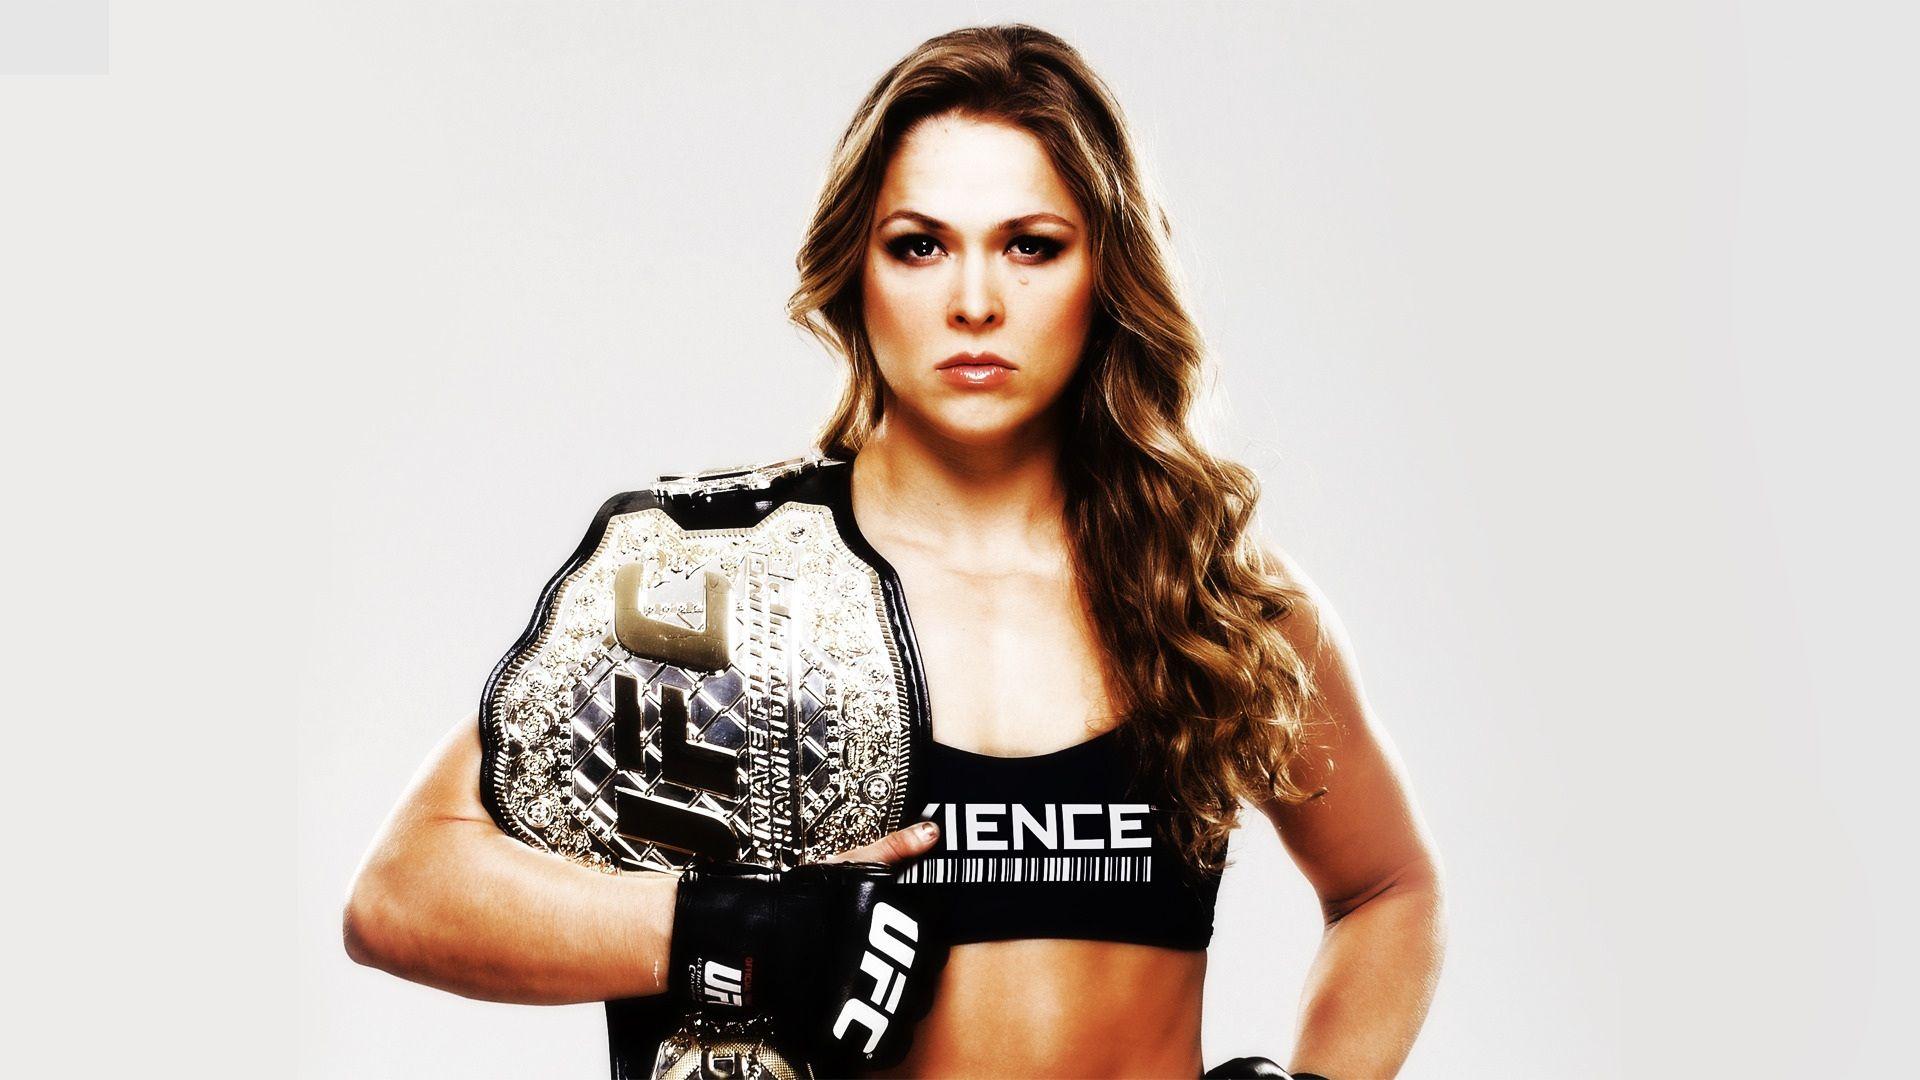 Ronda Rousey Full HD Wallpaper and Background Imagex1080